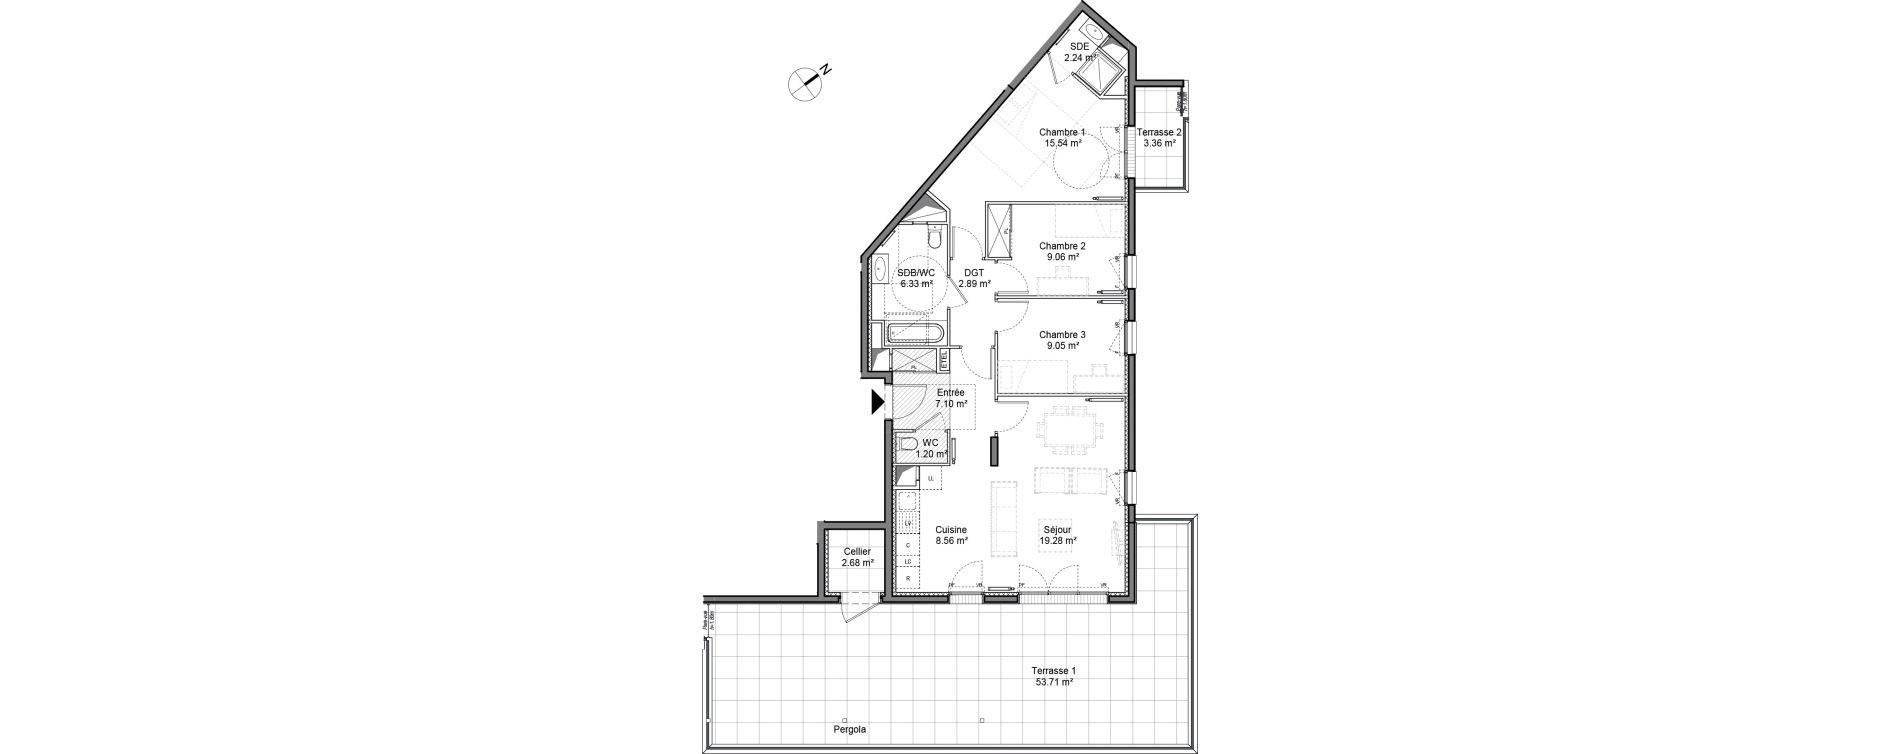 Appartement T4 de 81,25 m2 &agrave; Ch&acirc;tenay-Malabry Chatenay malabry voltaire